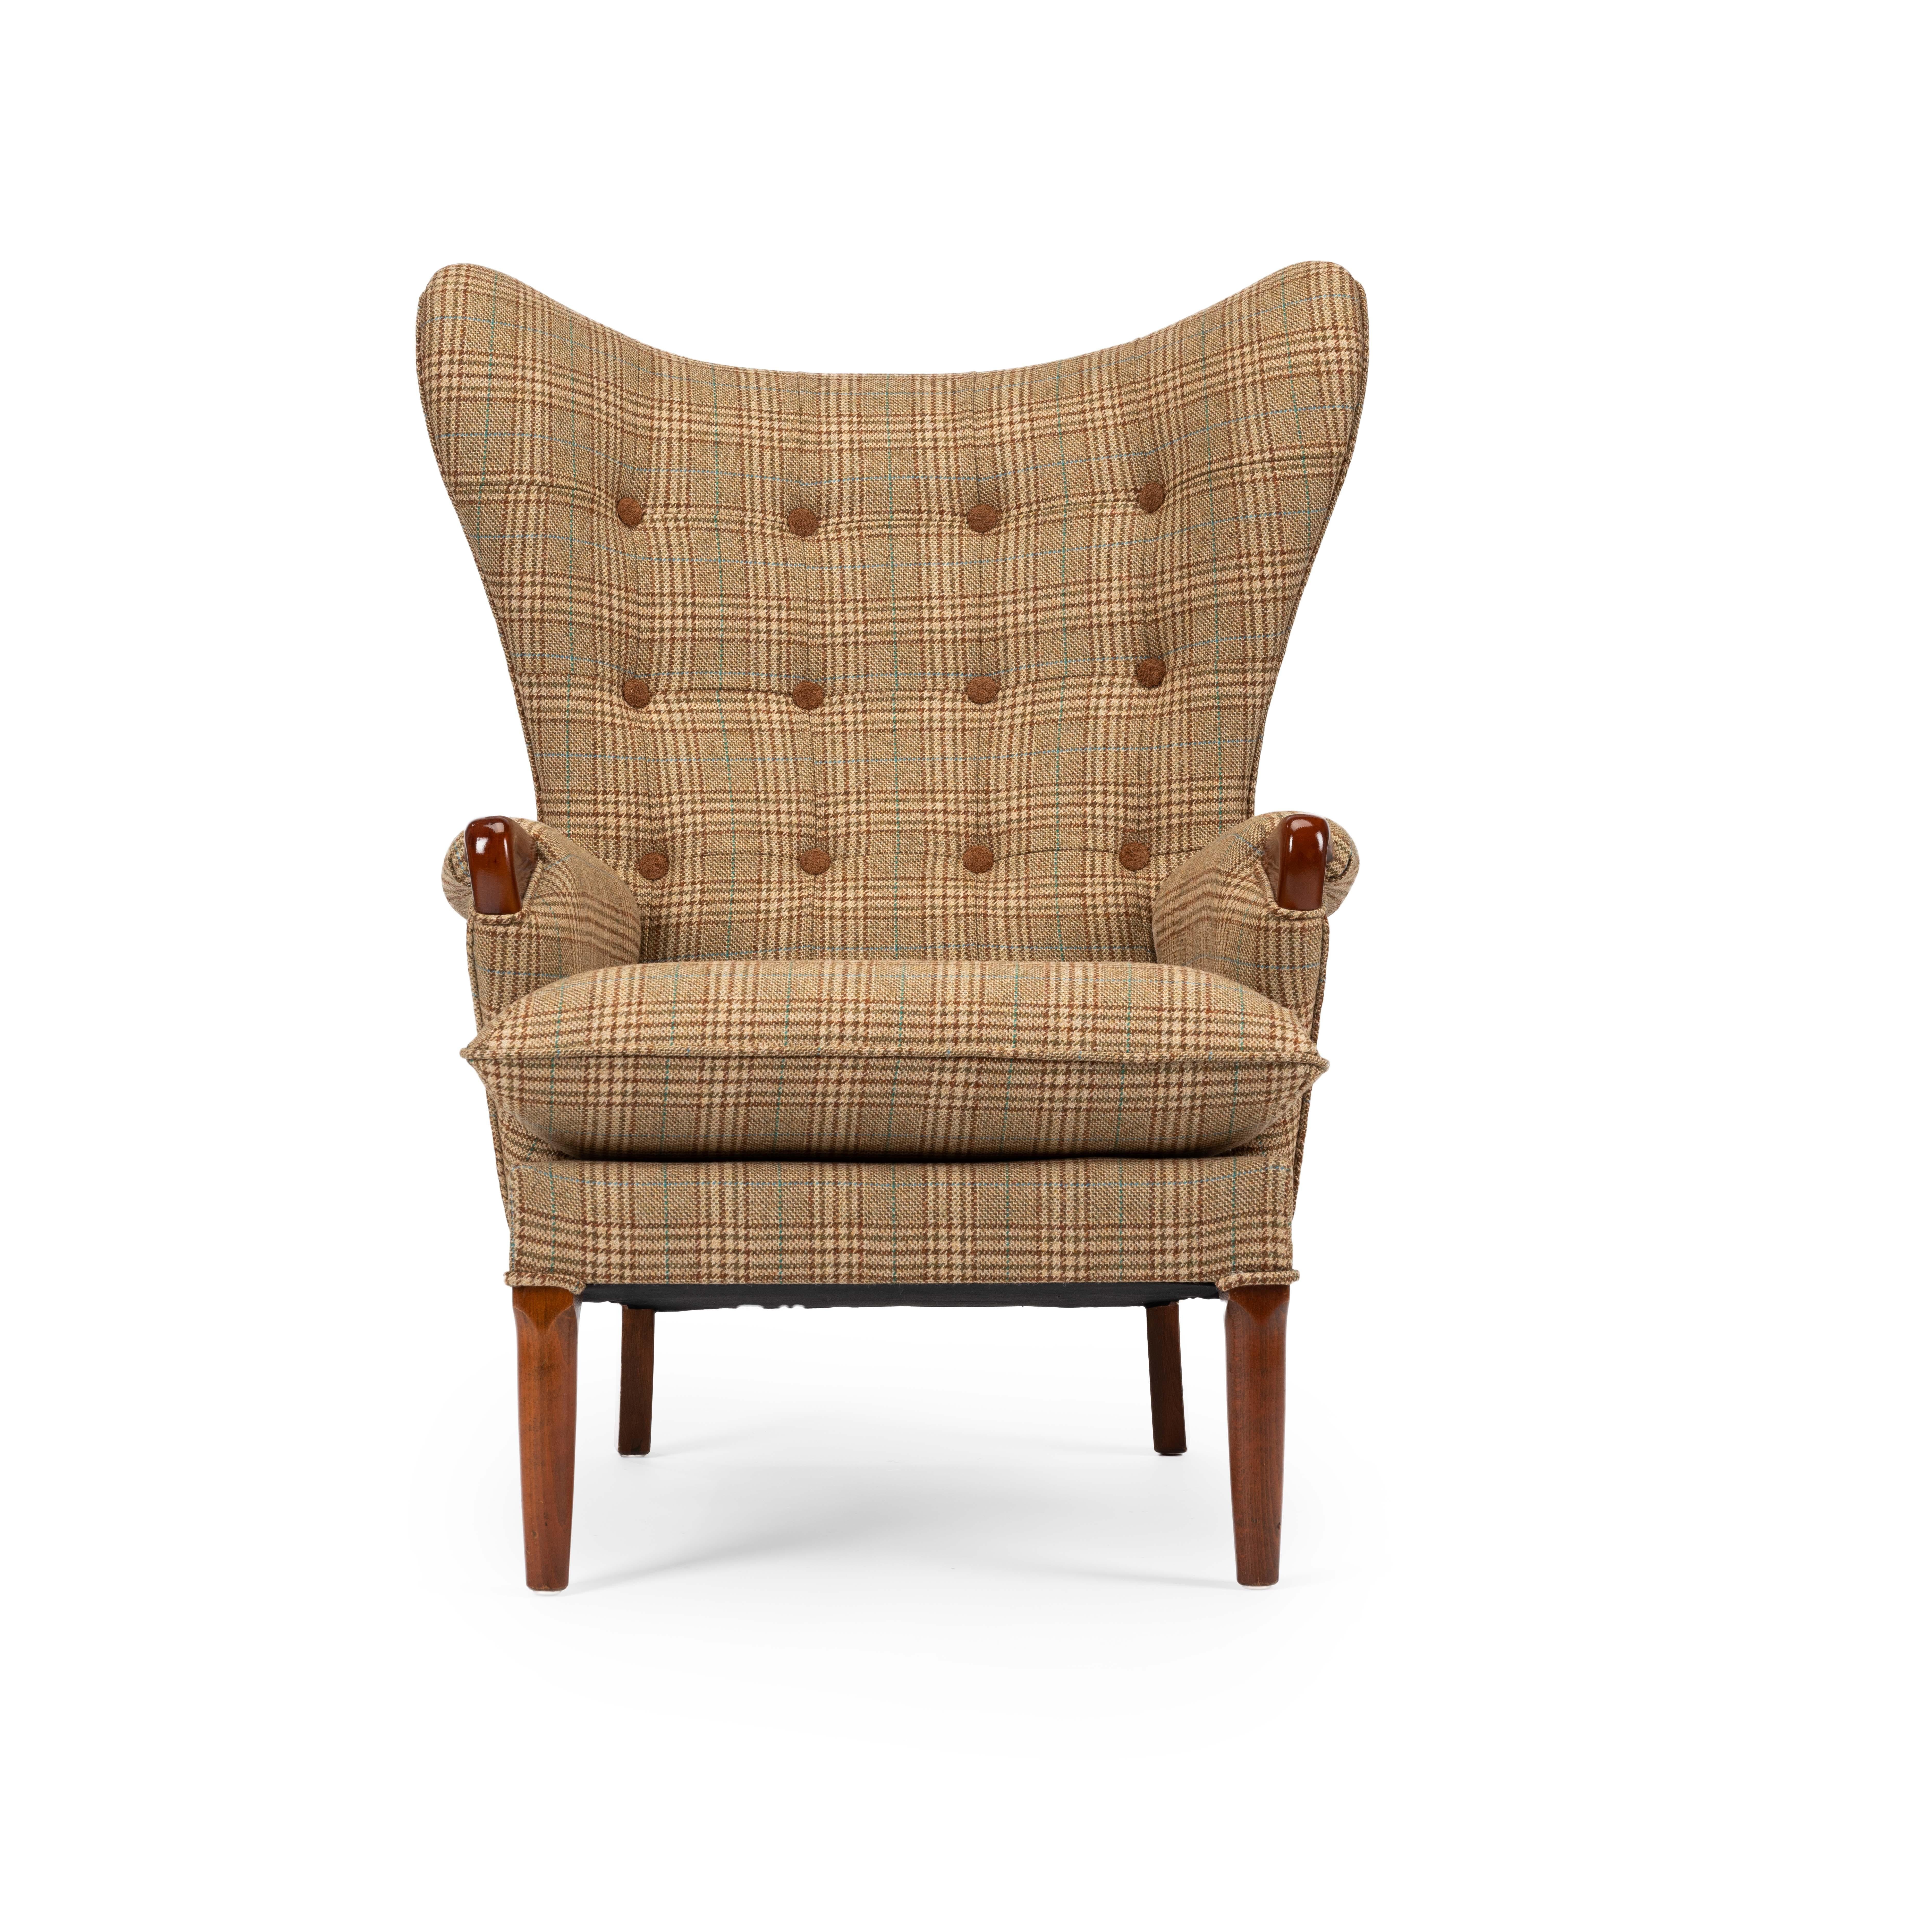 Mid-Century Modern Midcentury Vintage Wingback Chairs Reupholstered in Yorkshire Tweed, circa 1960s